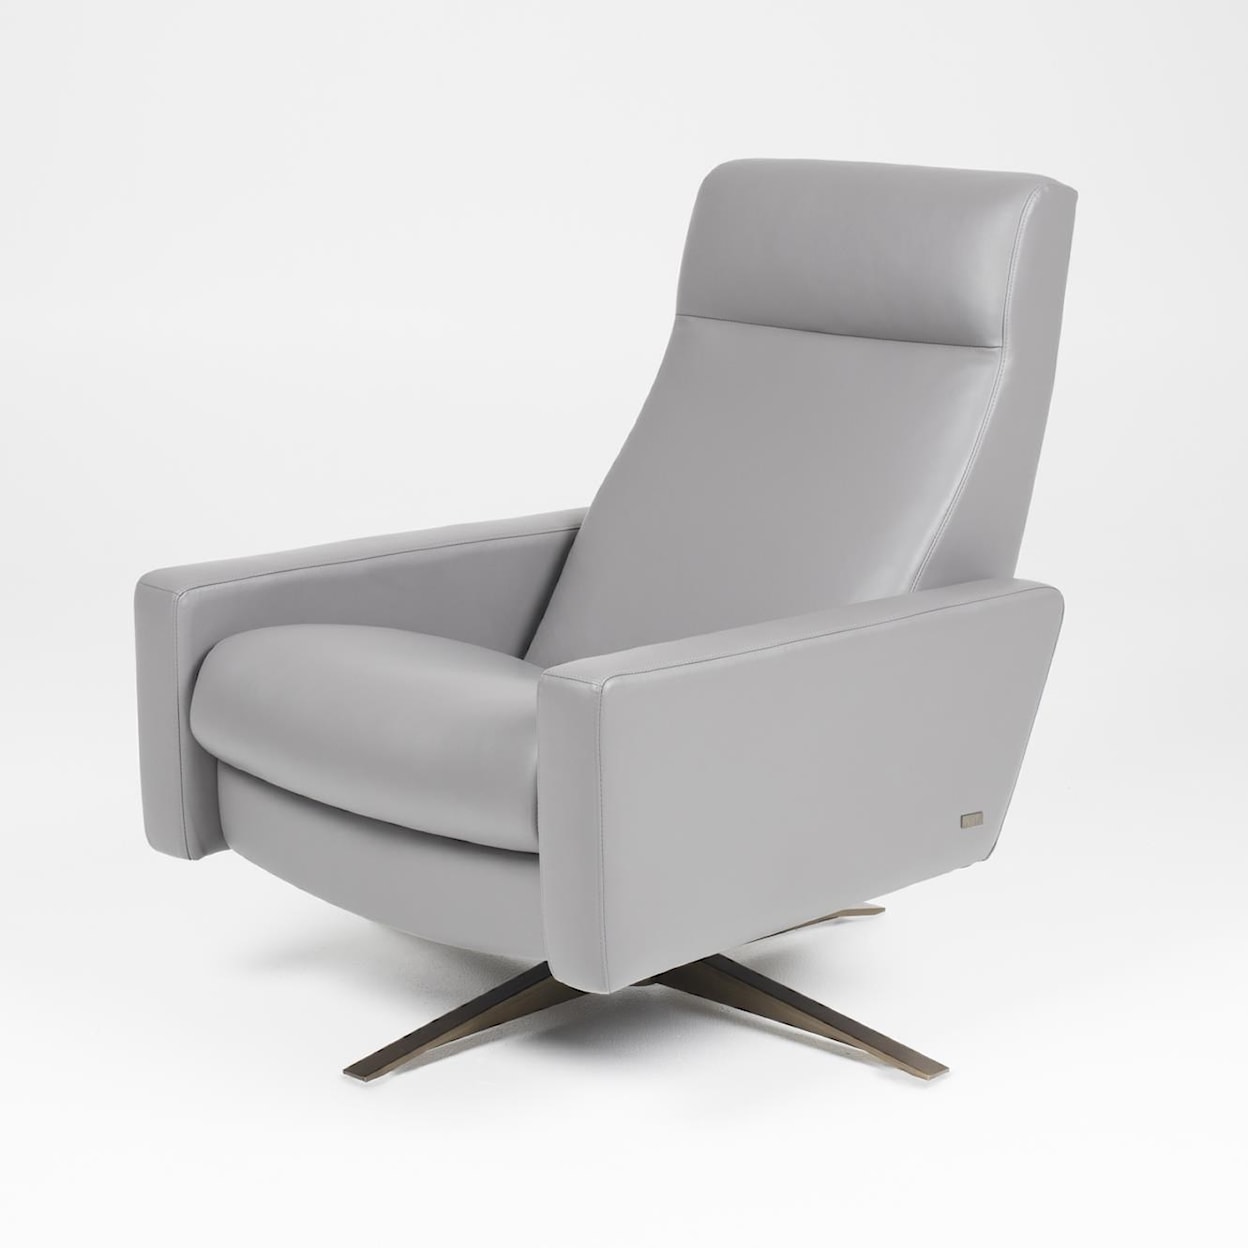 American Leather Cloud Standard Pushback Chair